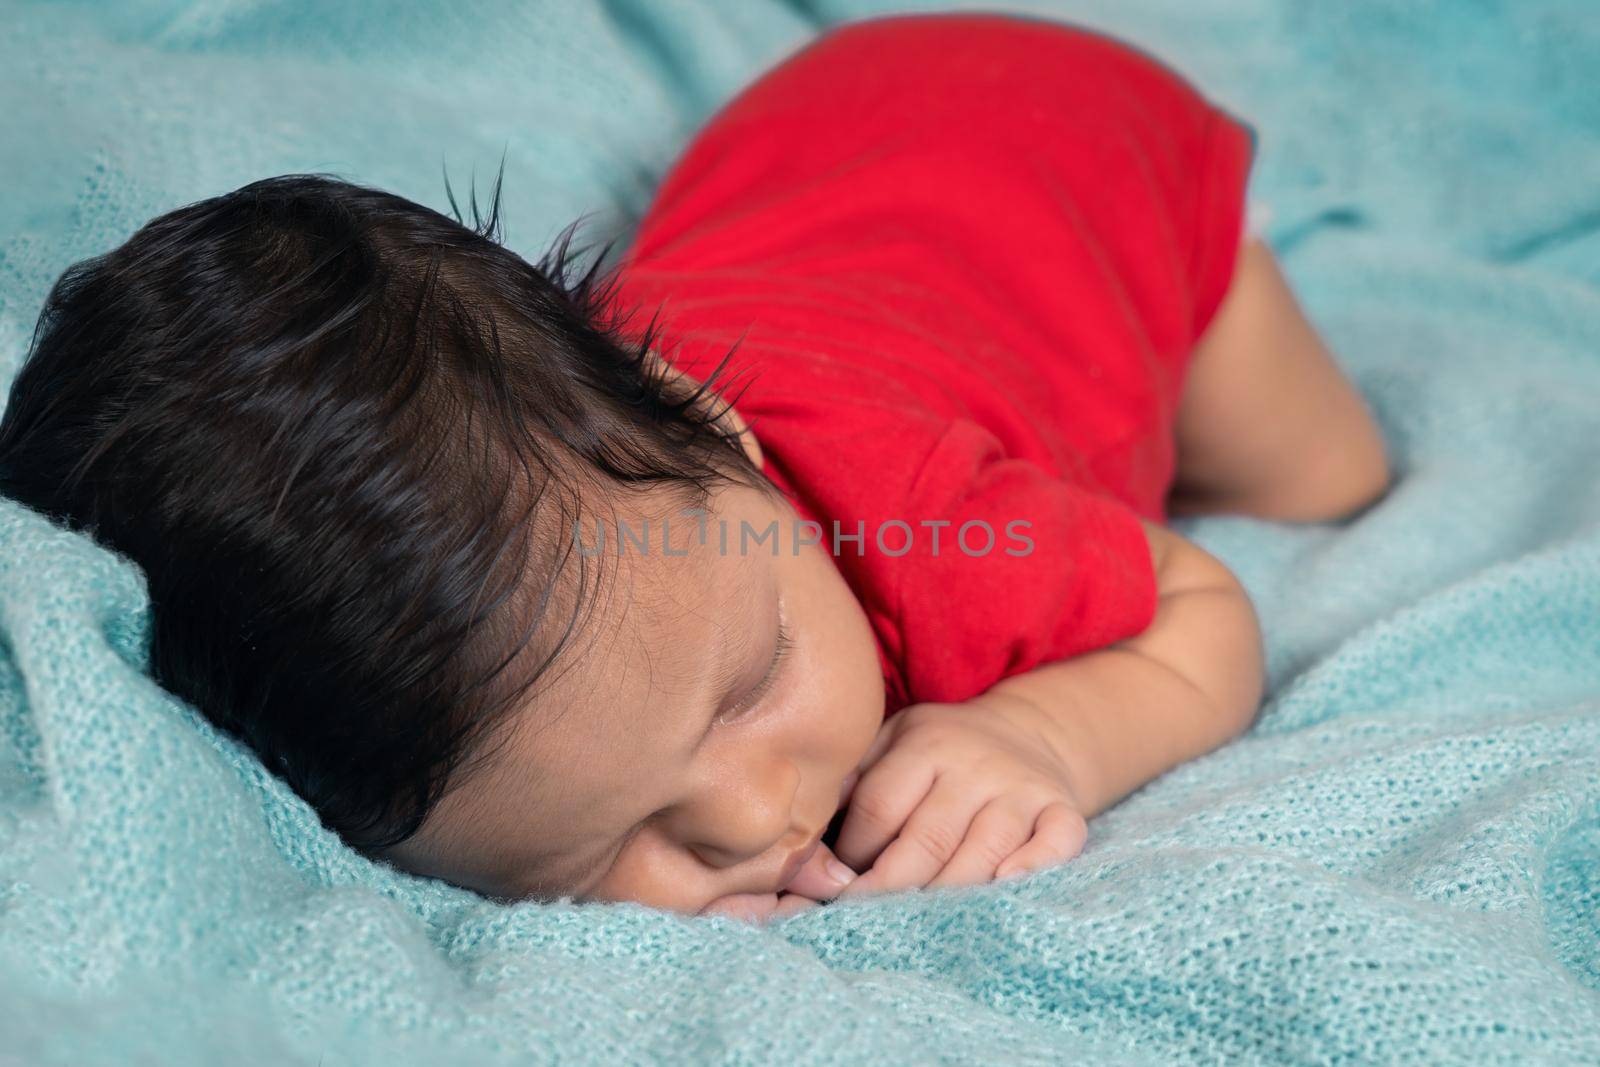 Baby sleeping on his stomach, dressed in red clothes